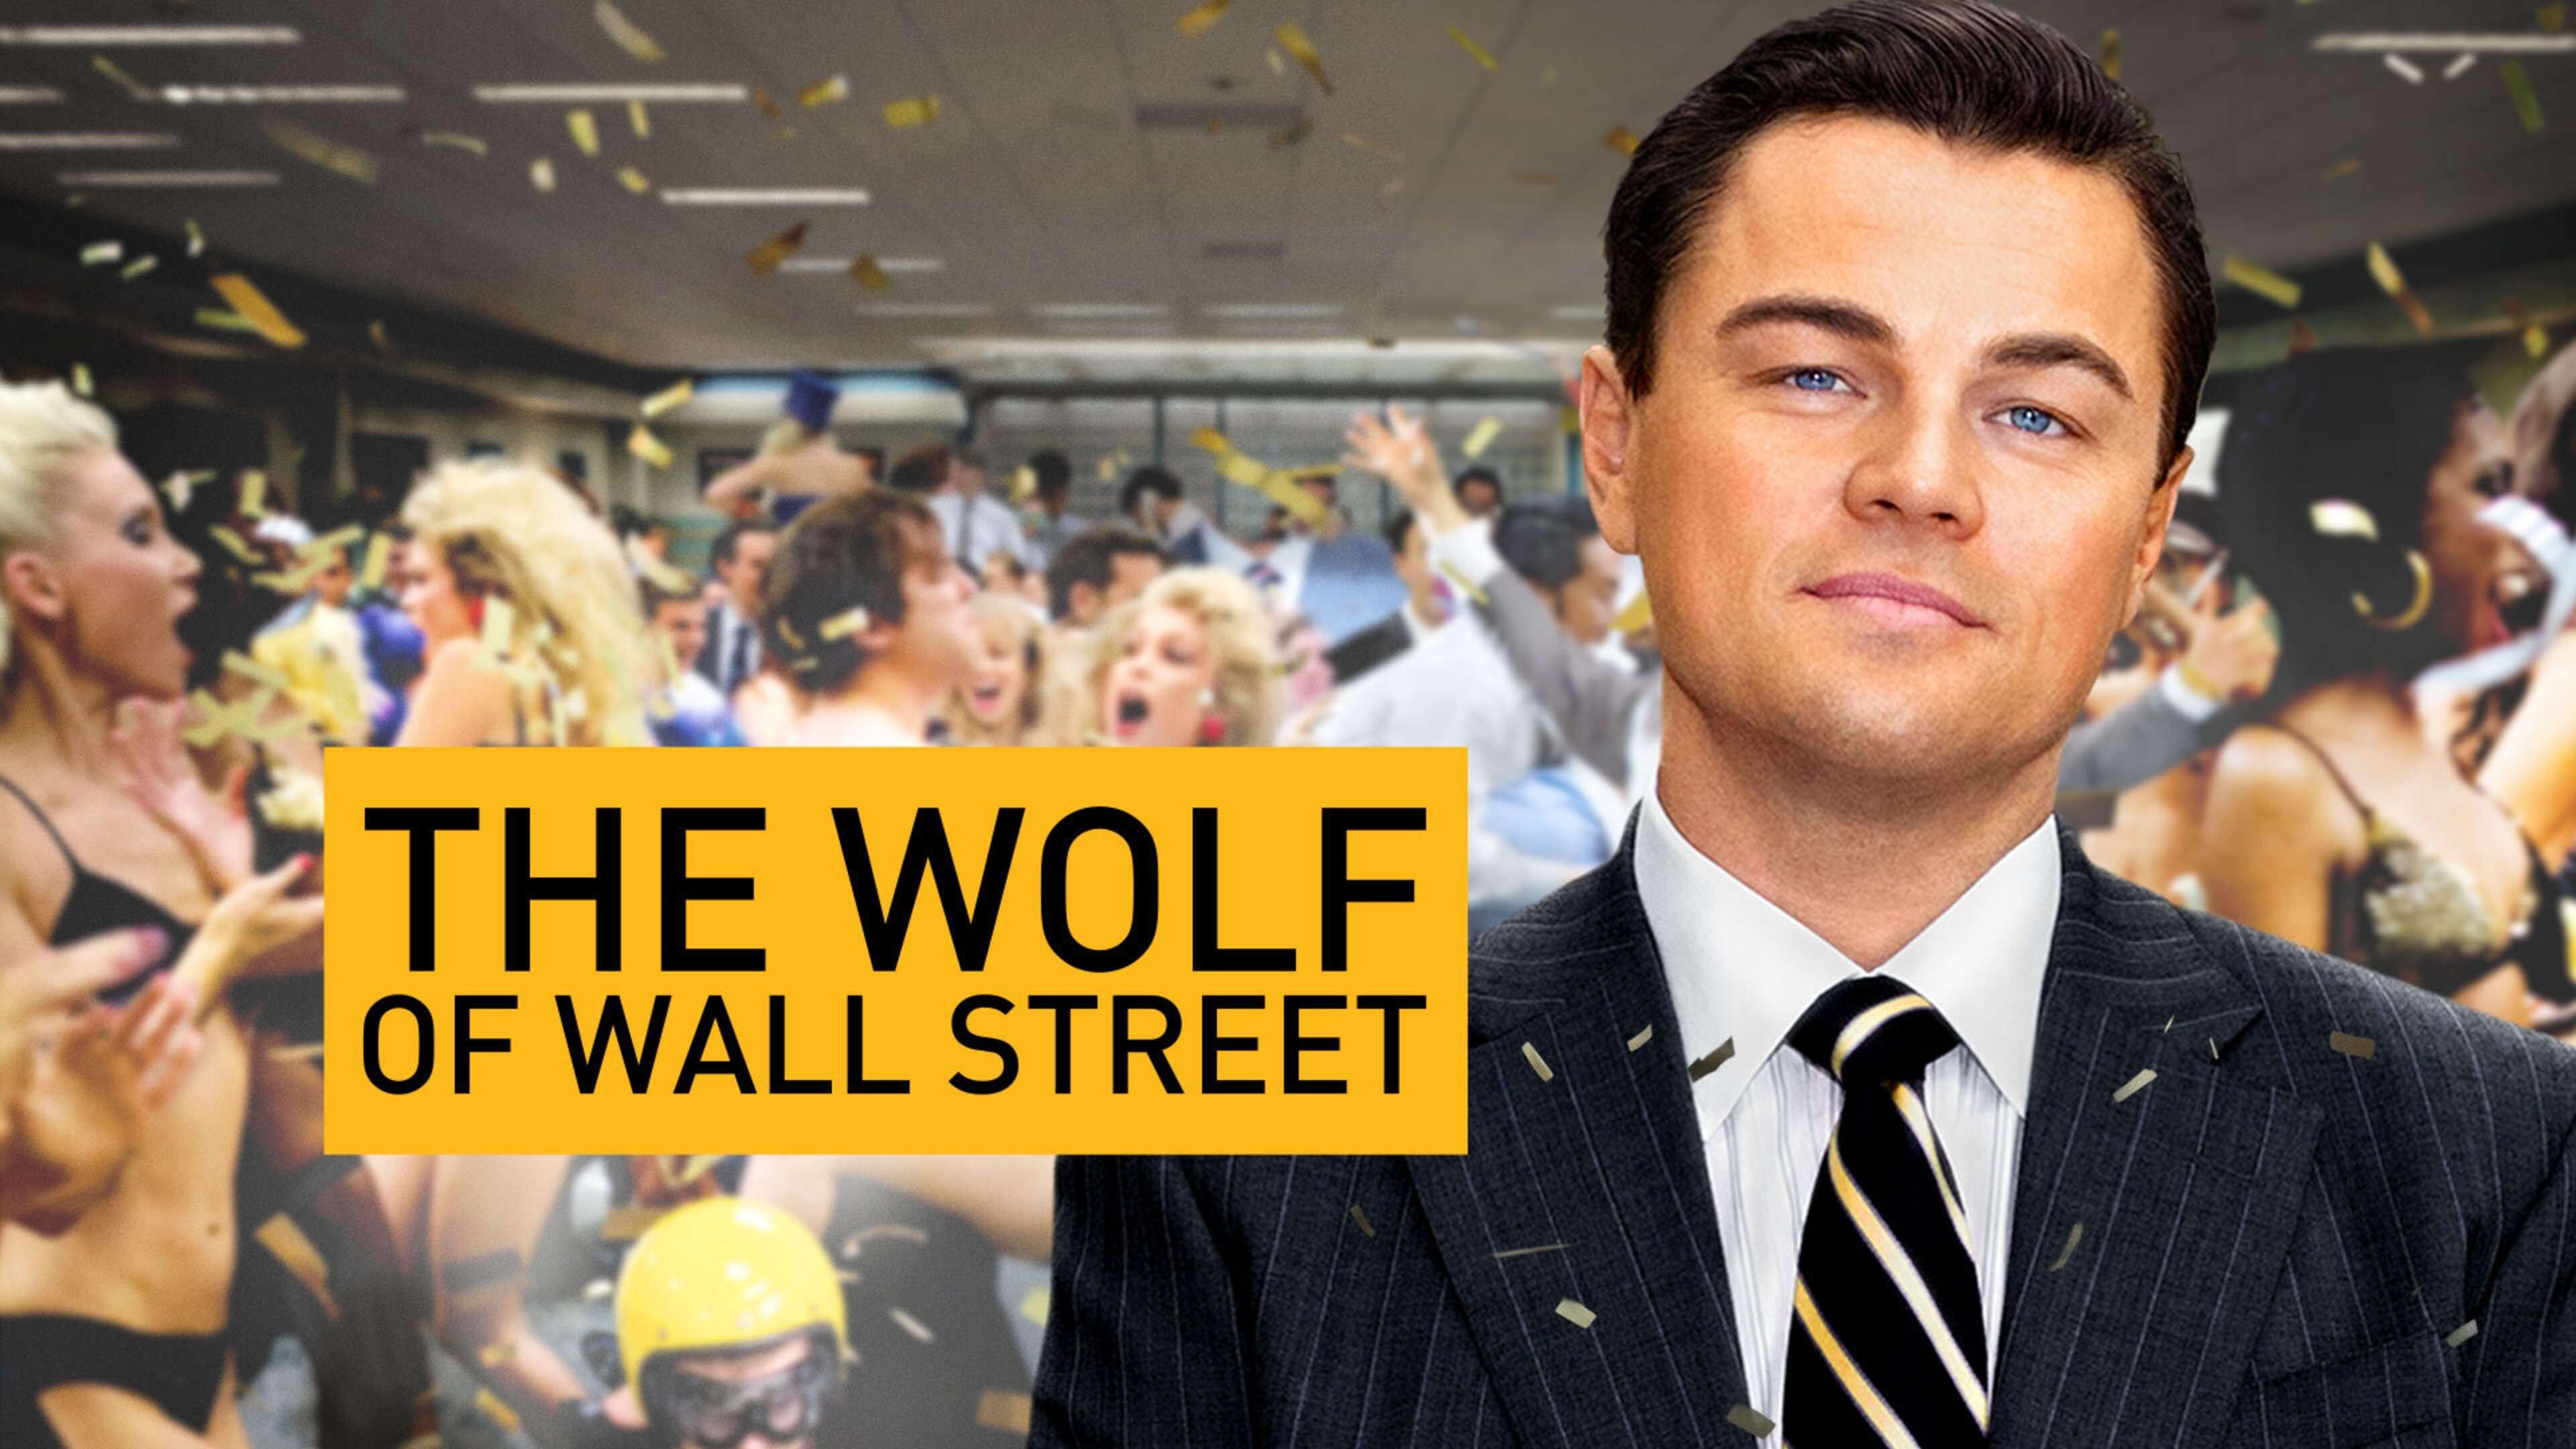 Watch The Wolf of Wall Street Streaming Online on Philo (Free Trial)